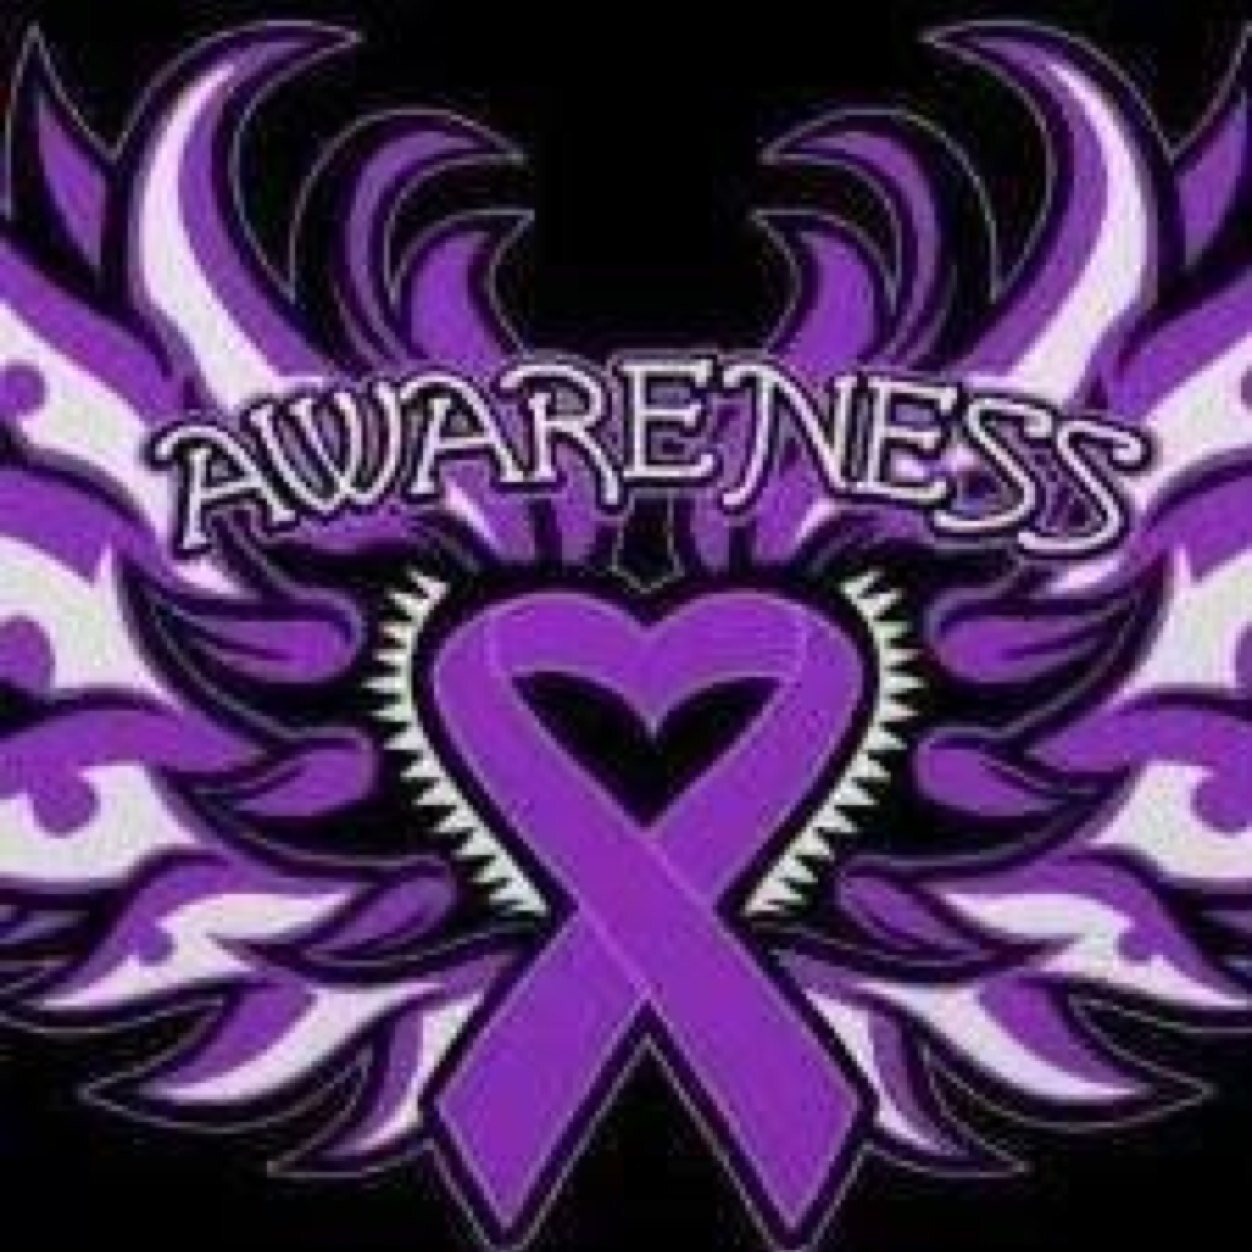 Surviving #lupus for over 25 years & counting! I hope to encourage and empower people whose lives have been affected by #lupus. #RA #CKD #spoonie